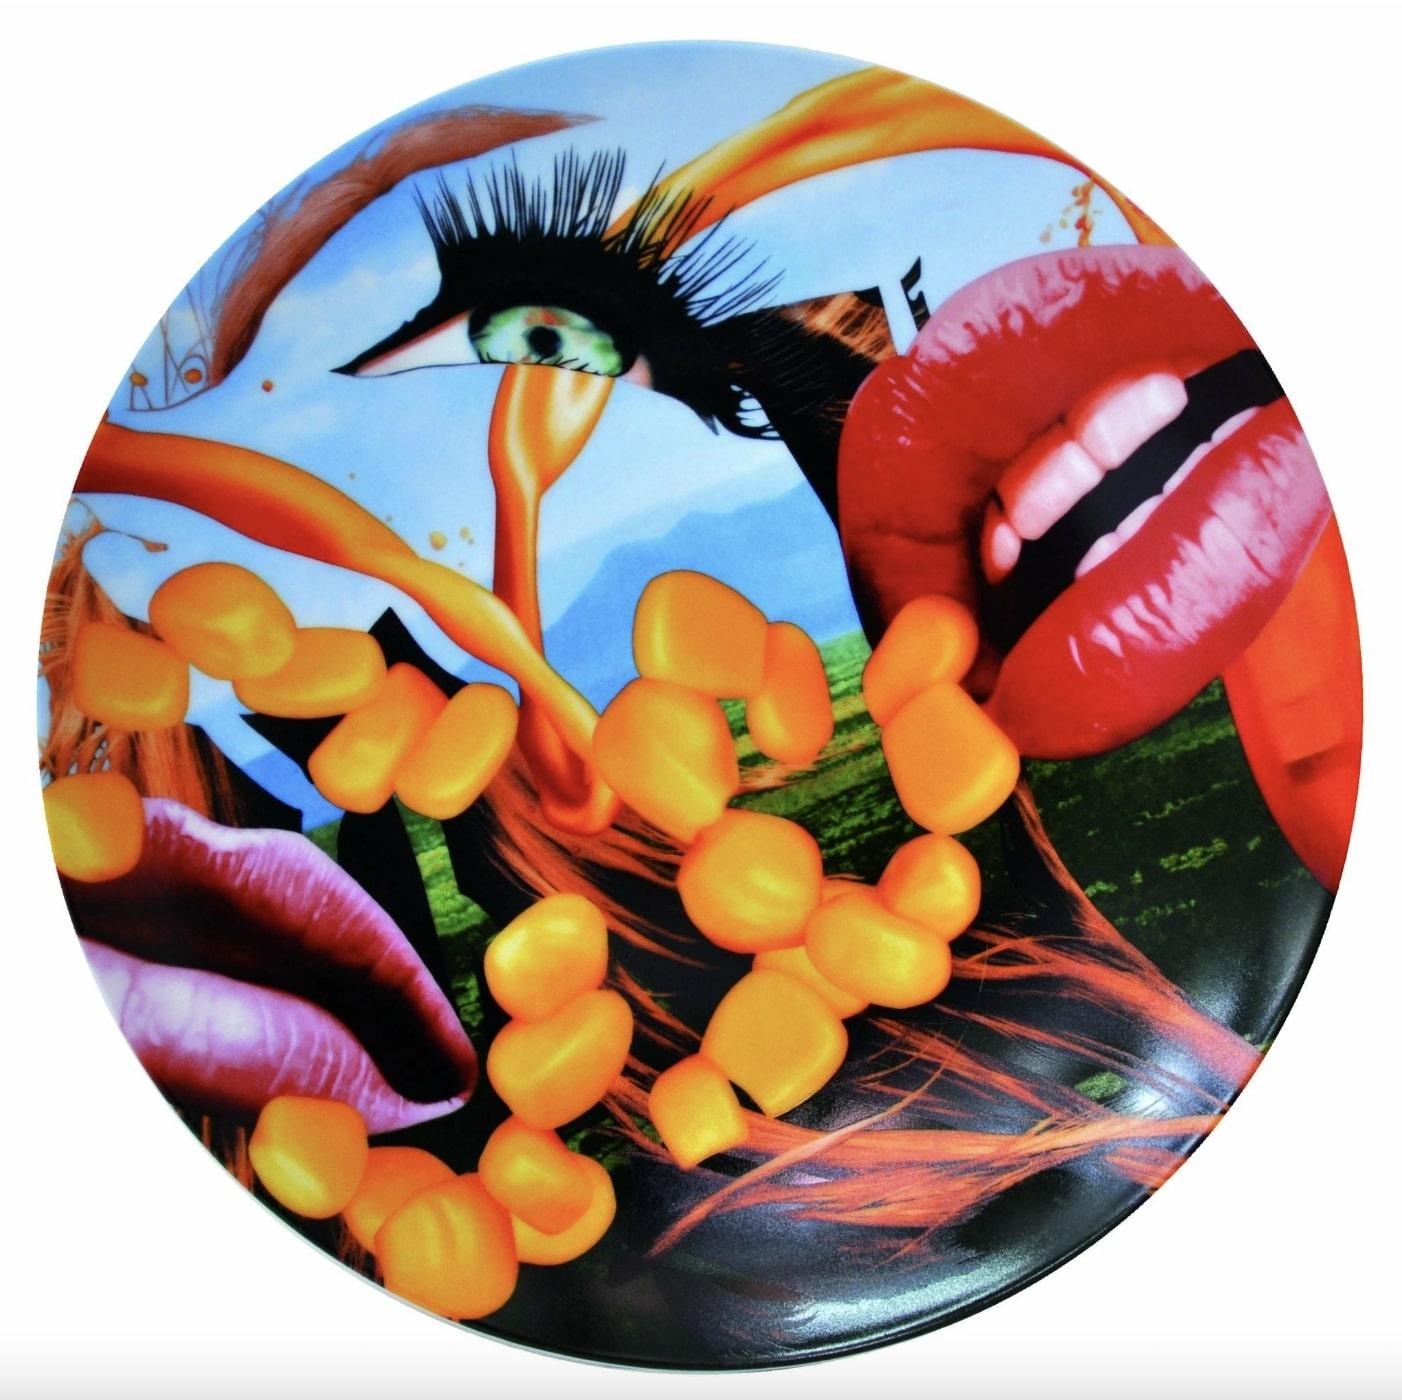 Lips coupe plate - Mixed Media Art by Jeff Koons